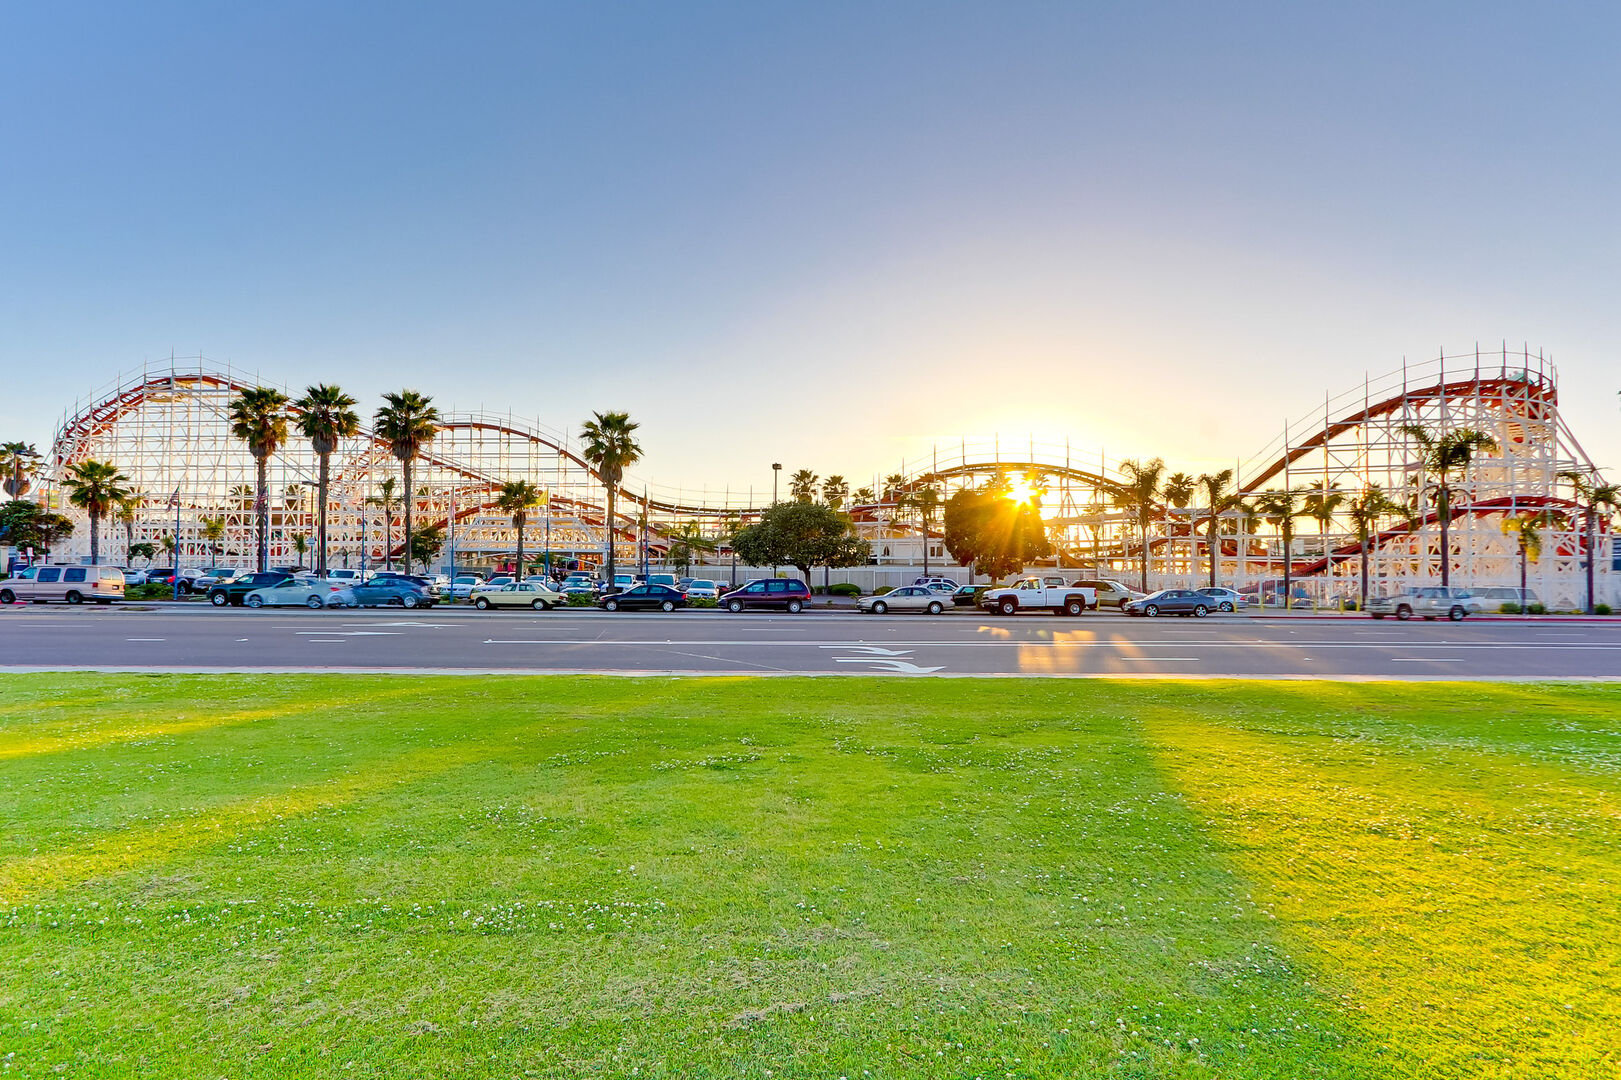 Belmont Amusement Park is the local attraction of Mission Beach and is located just south, walking distance from the condo